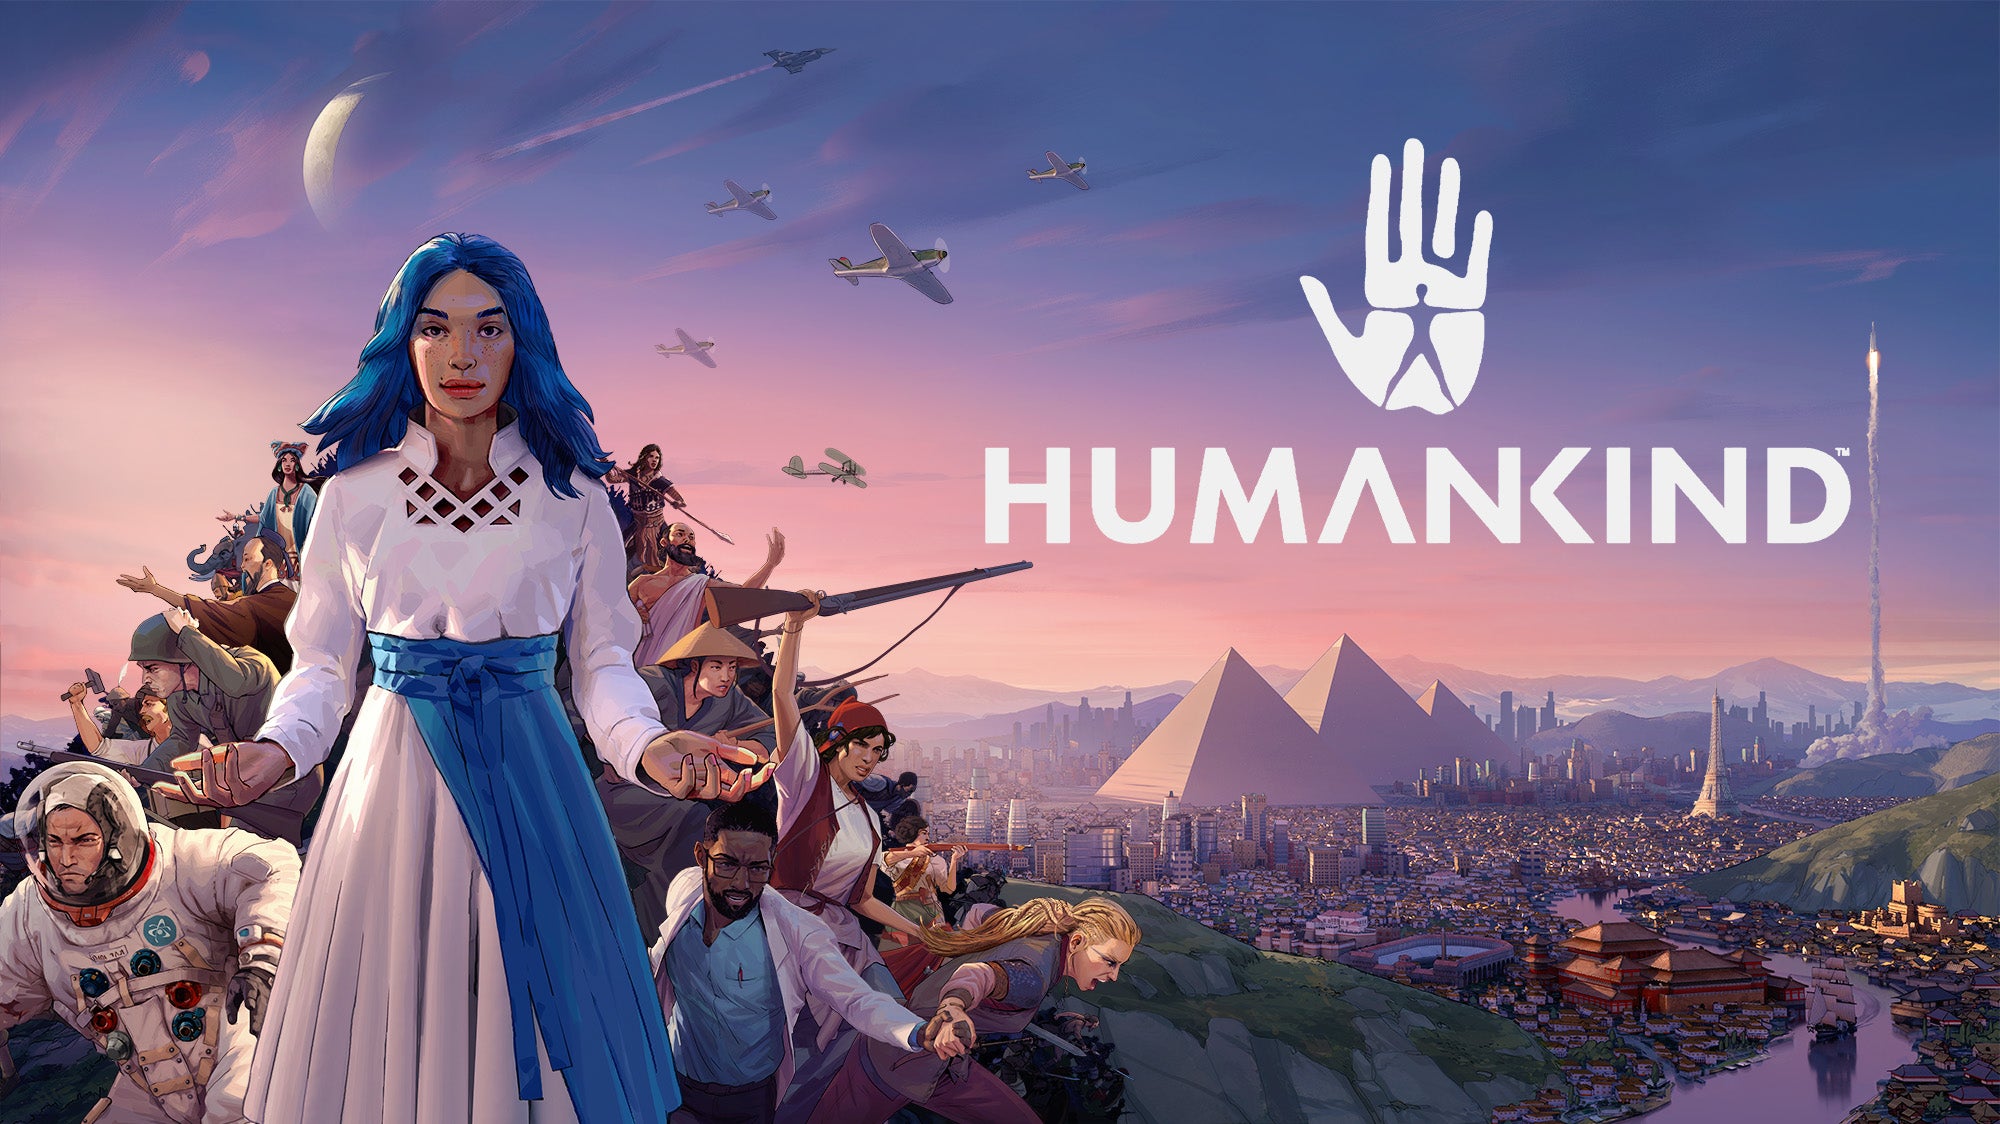 Image for Humankind is heading to PlayStation and Xbox, launching via Game Pass